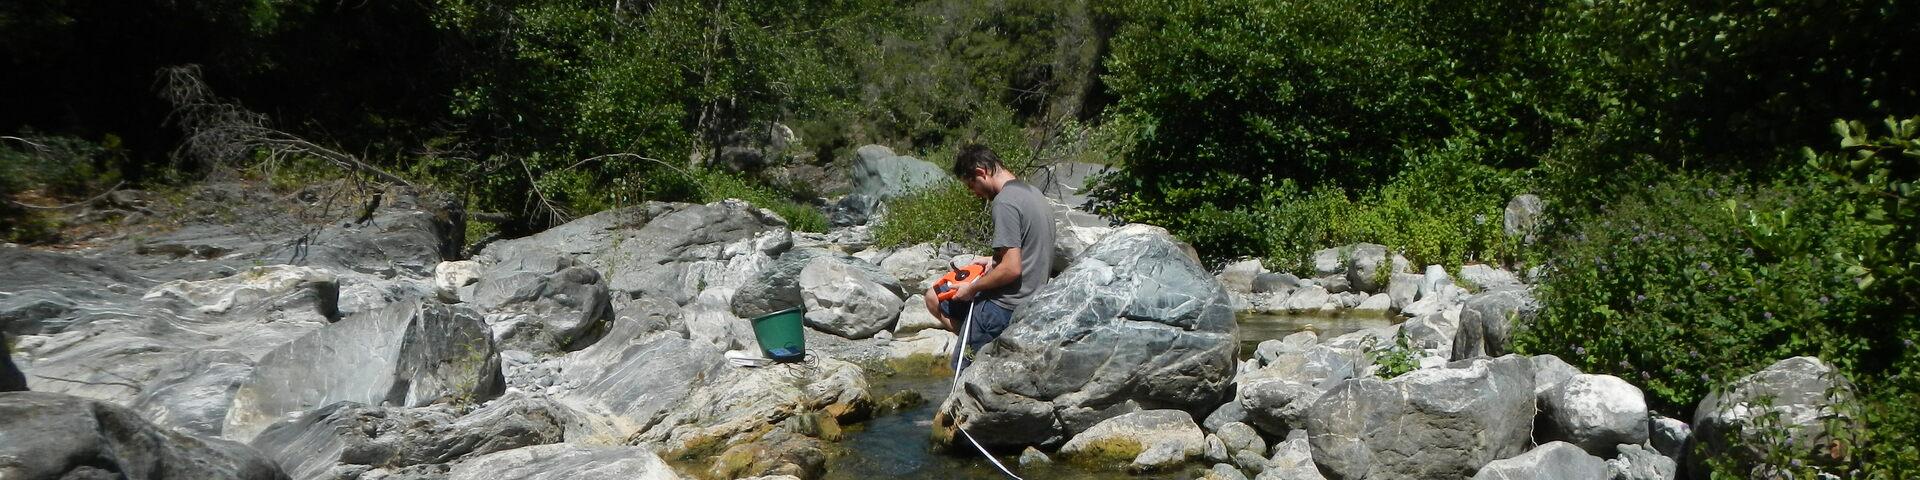 Measuring discharge rate by means of a saline tracer in the Tagnone valley, Corsica